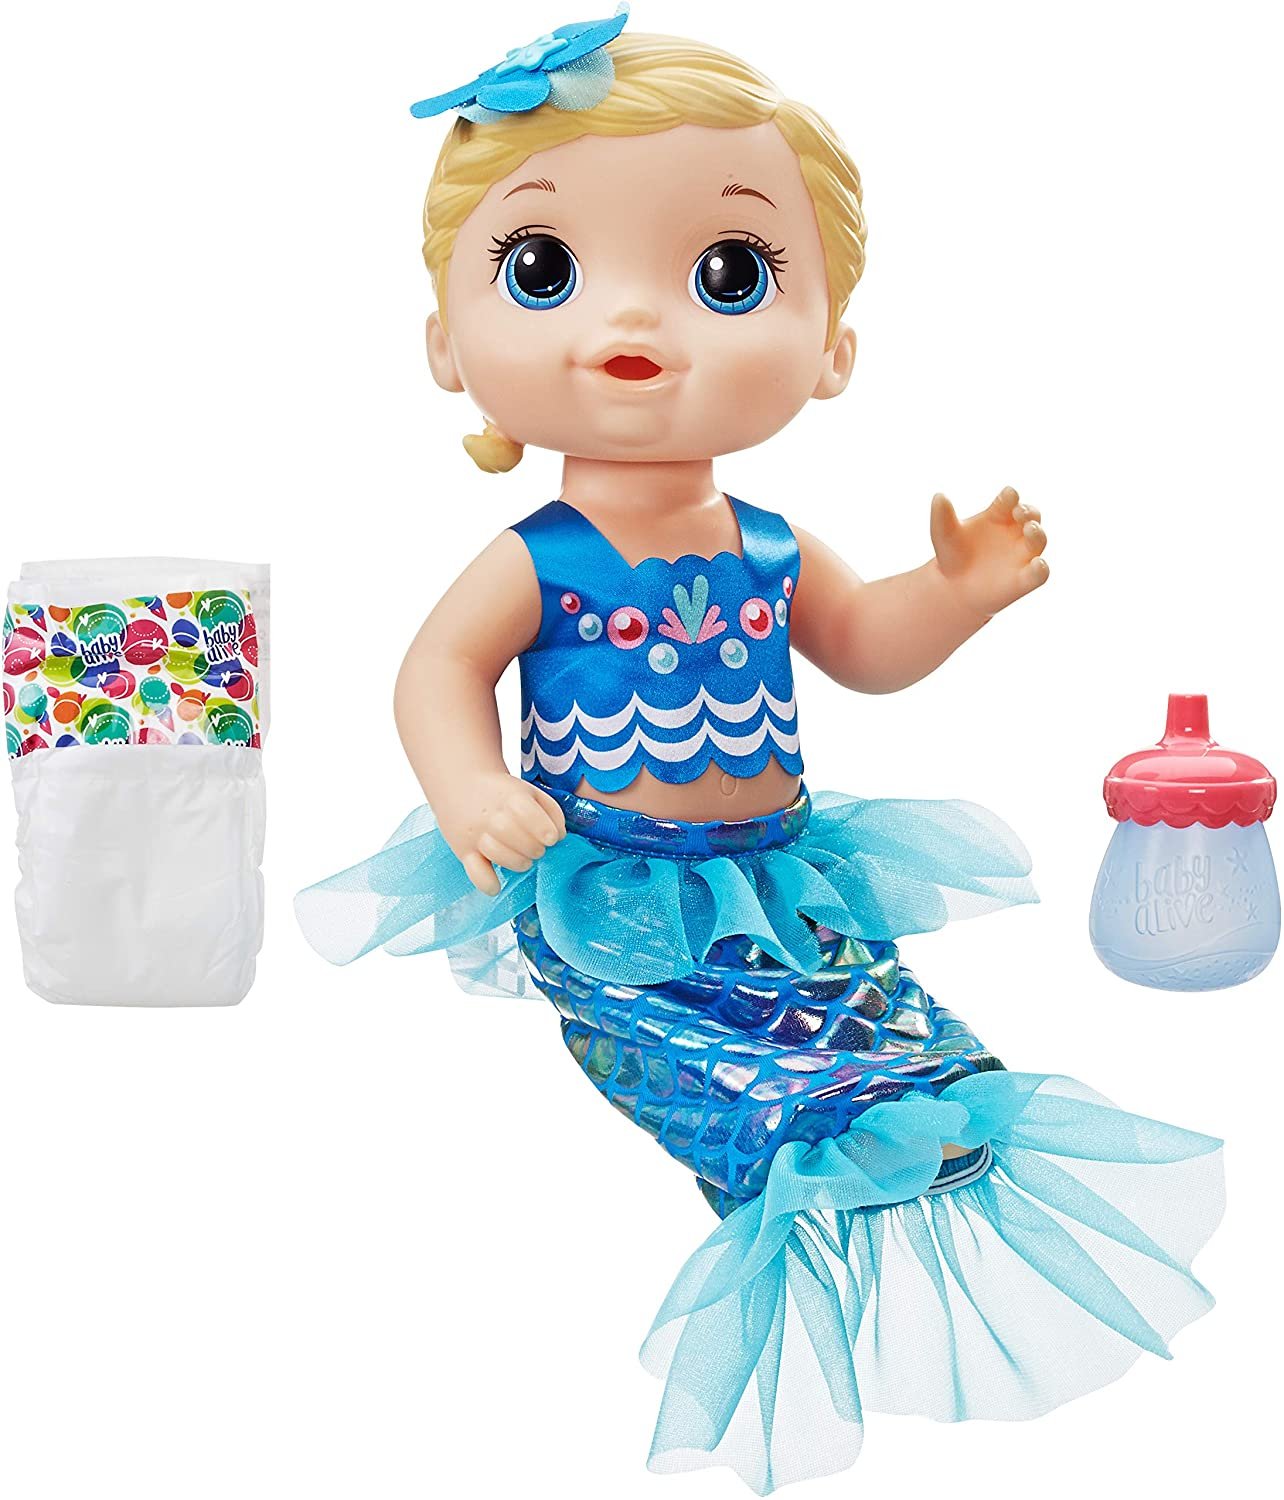 Baby Alive: Shimmer 'n Splash Mermaid 14-Inch Doll Brown Hair, Green Eyes Kids Toy for Boys and Girls - image 1 of 8